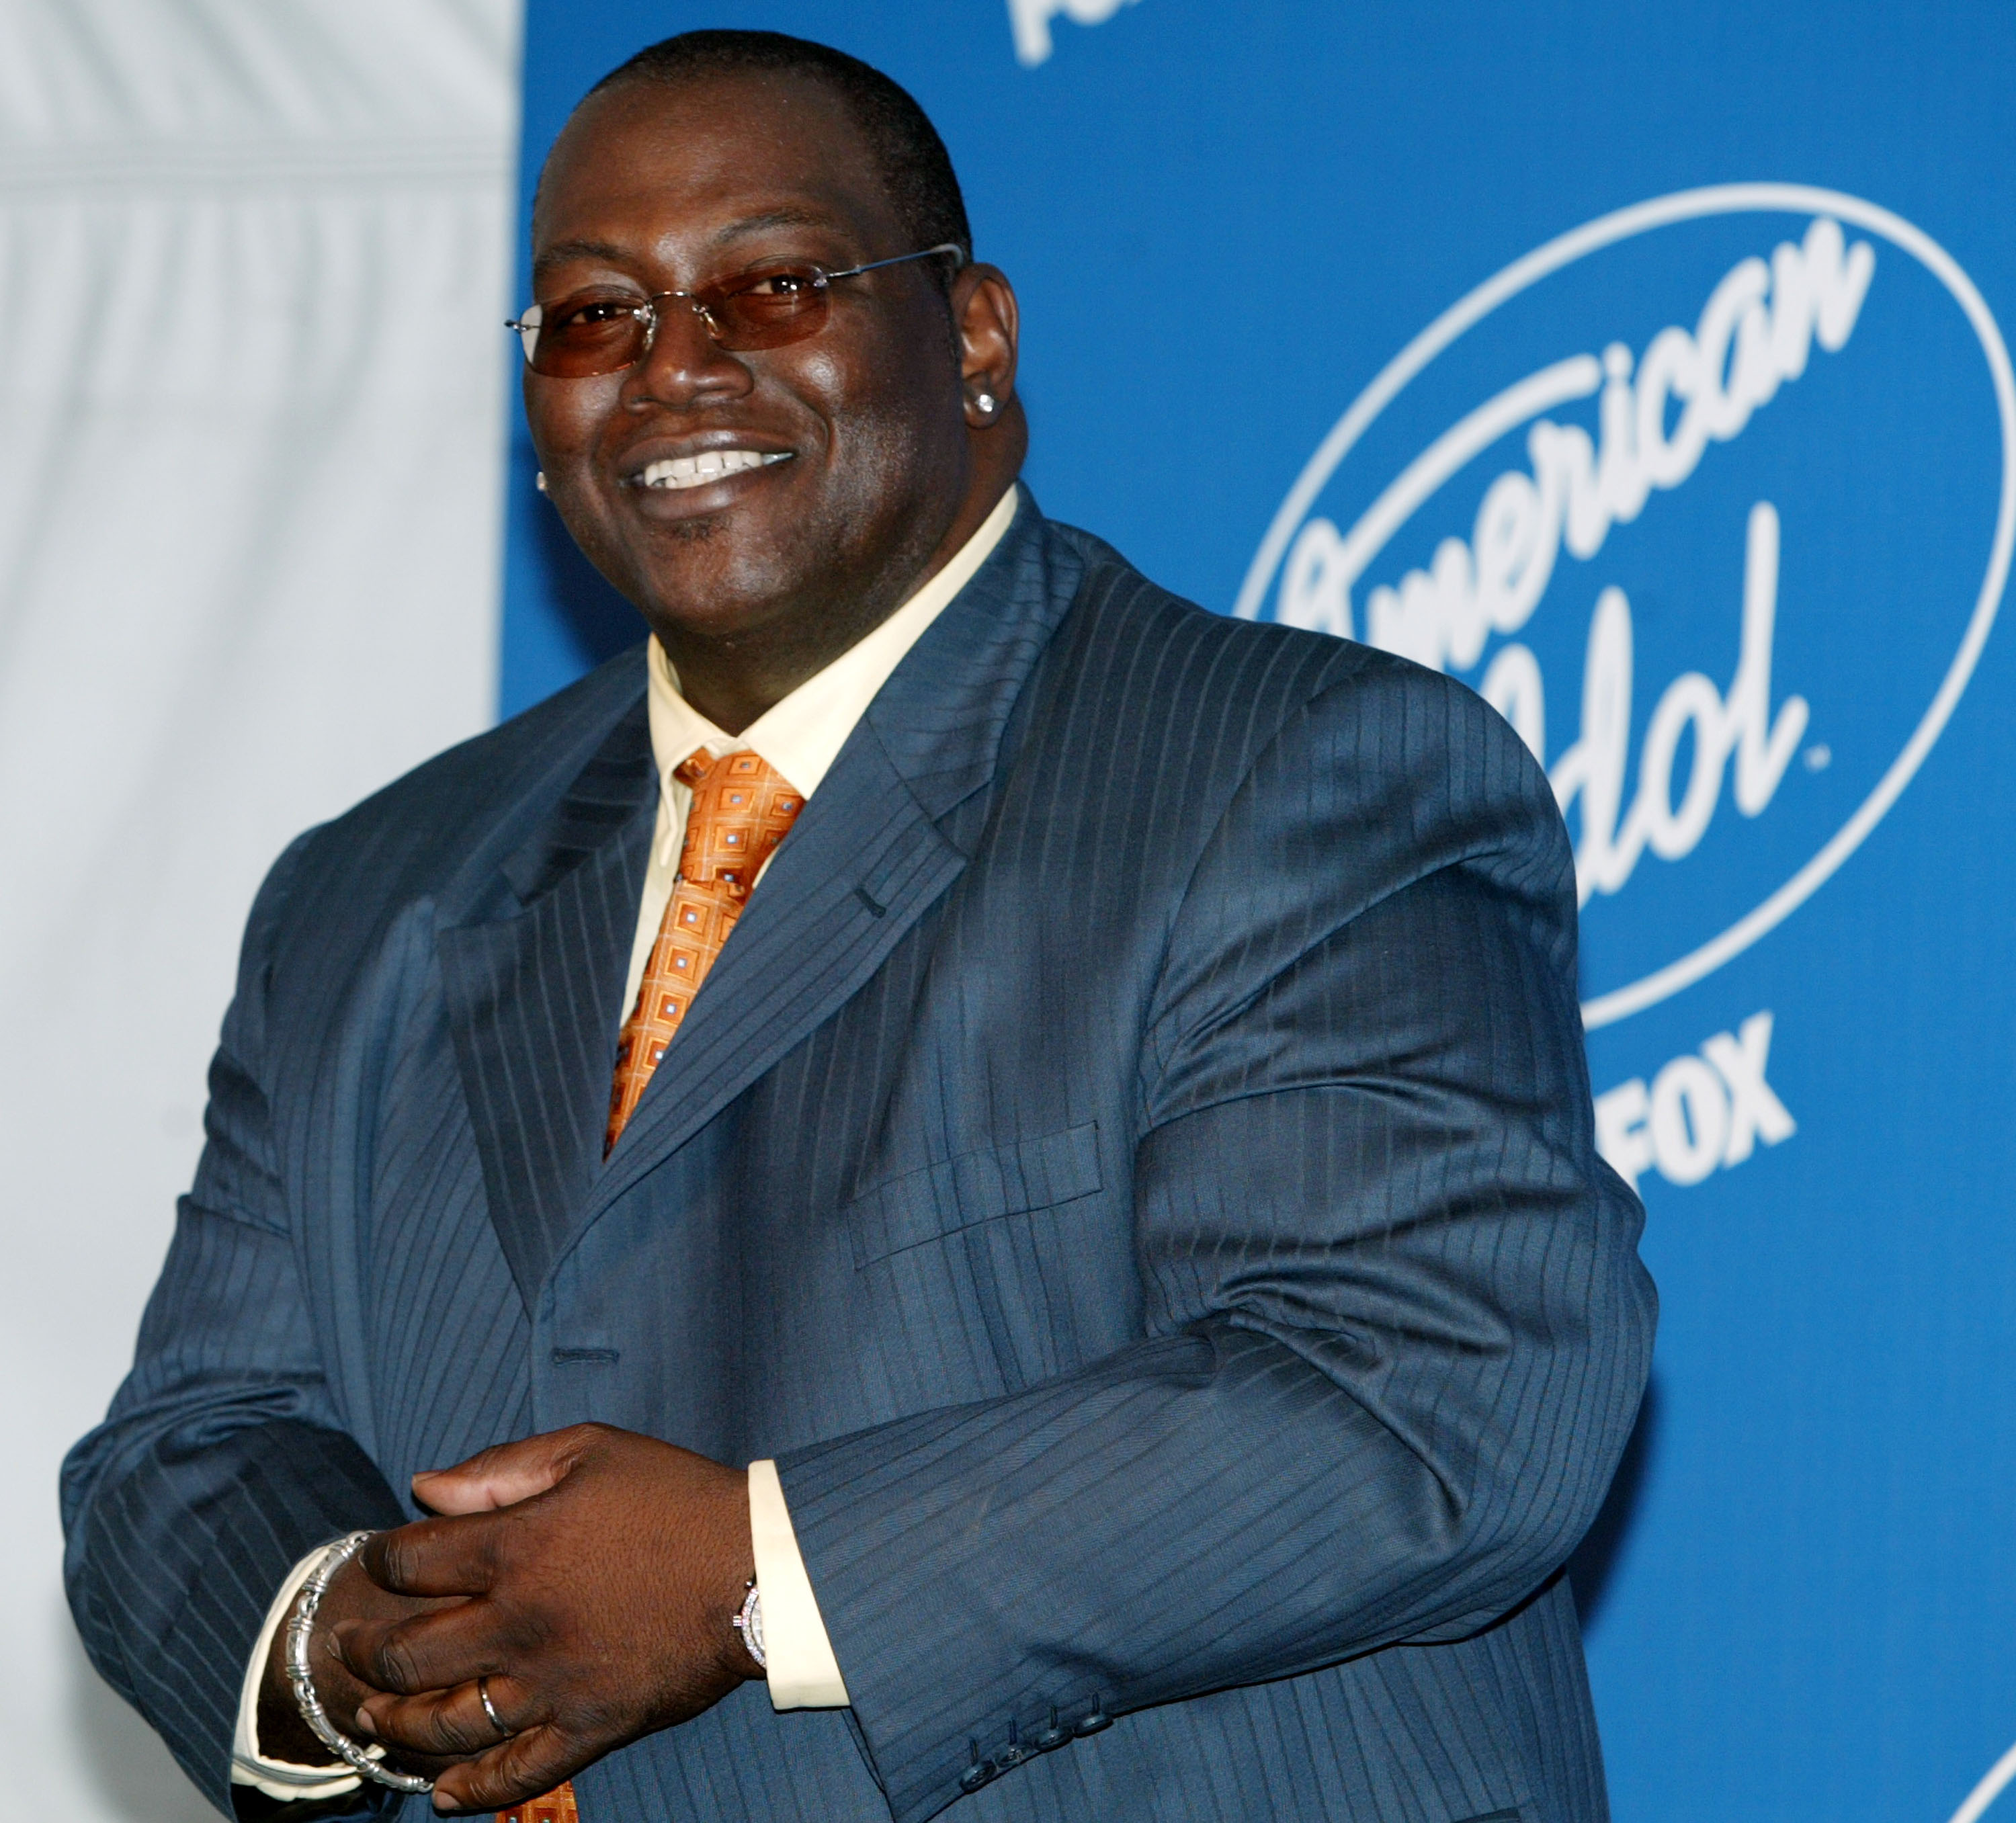 Randy Jackson, pictured during his early American Idol days, revealed in 2022 that he had lost over 100 pounds